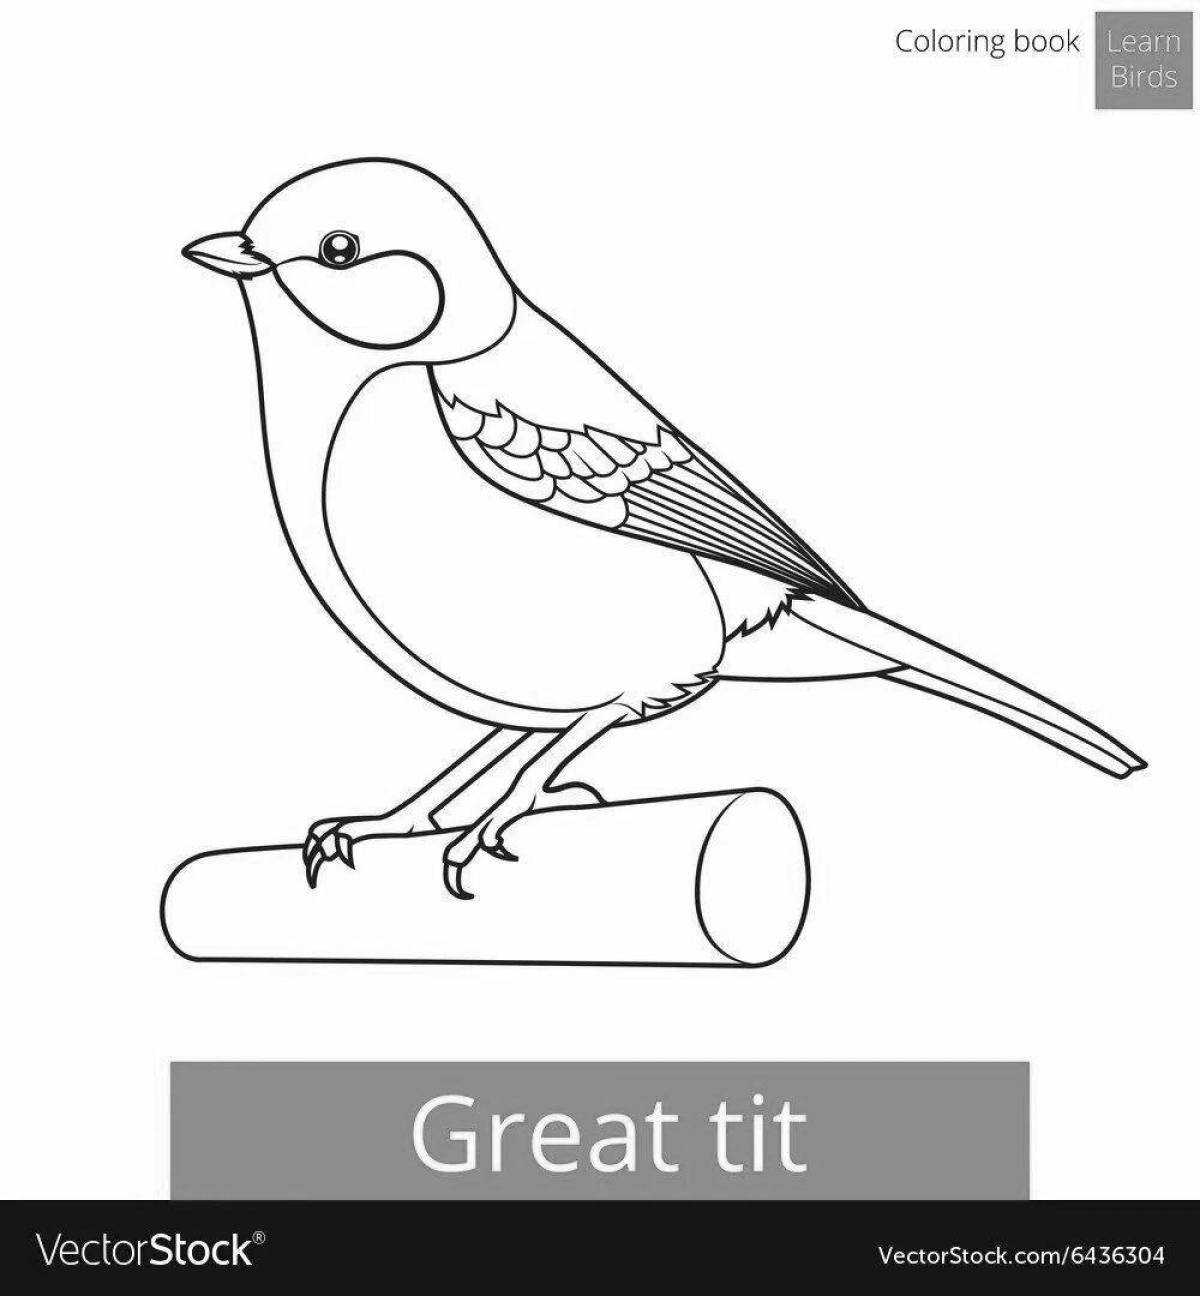 Coloring page with famous titmouse pattern